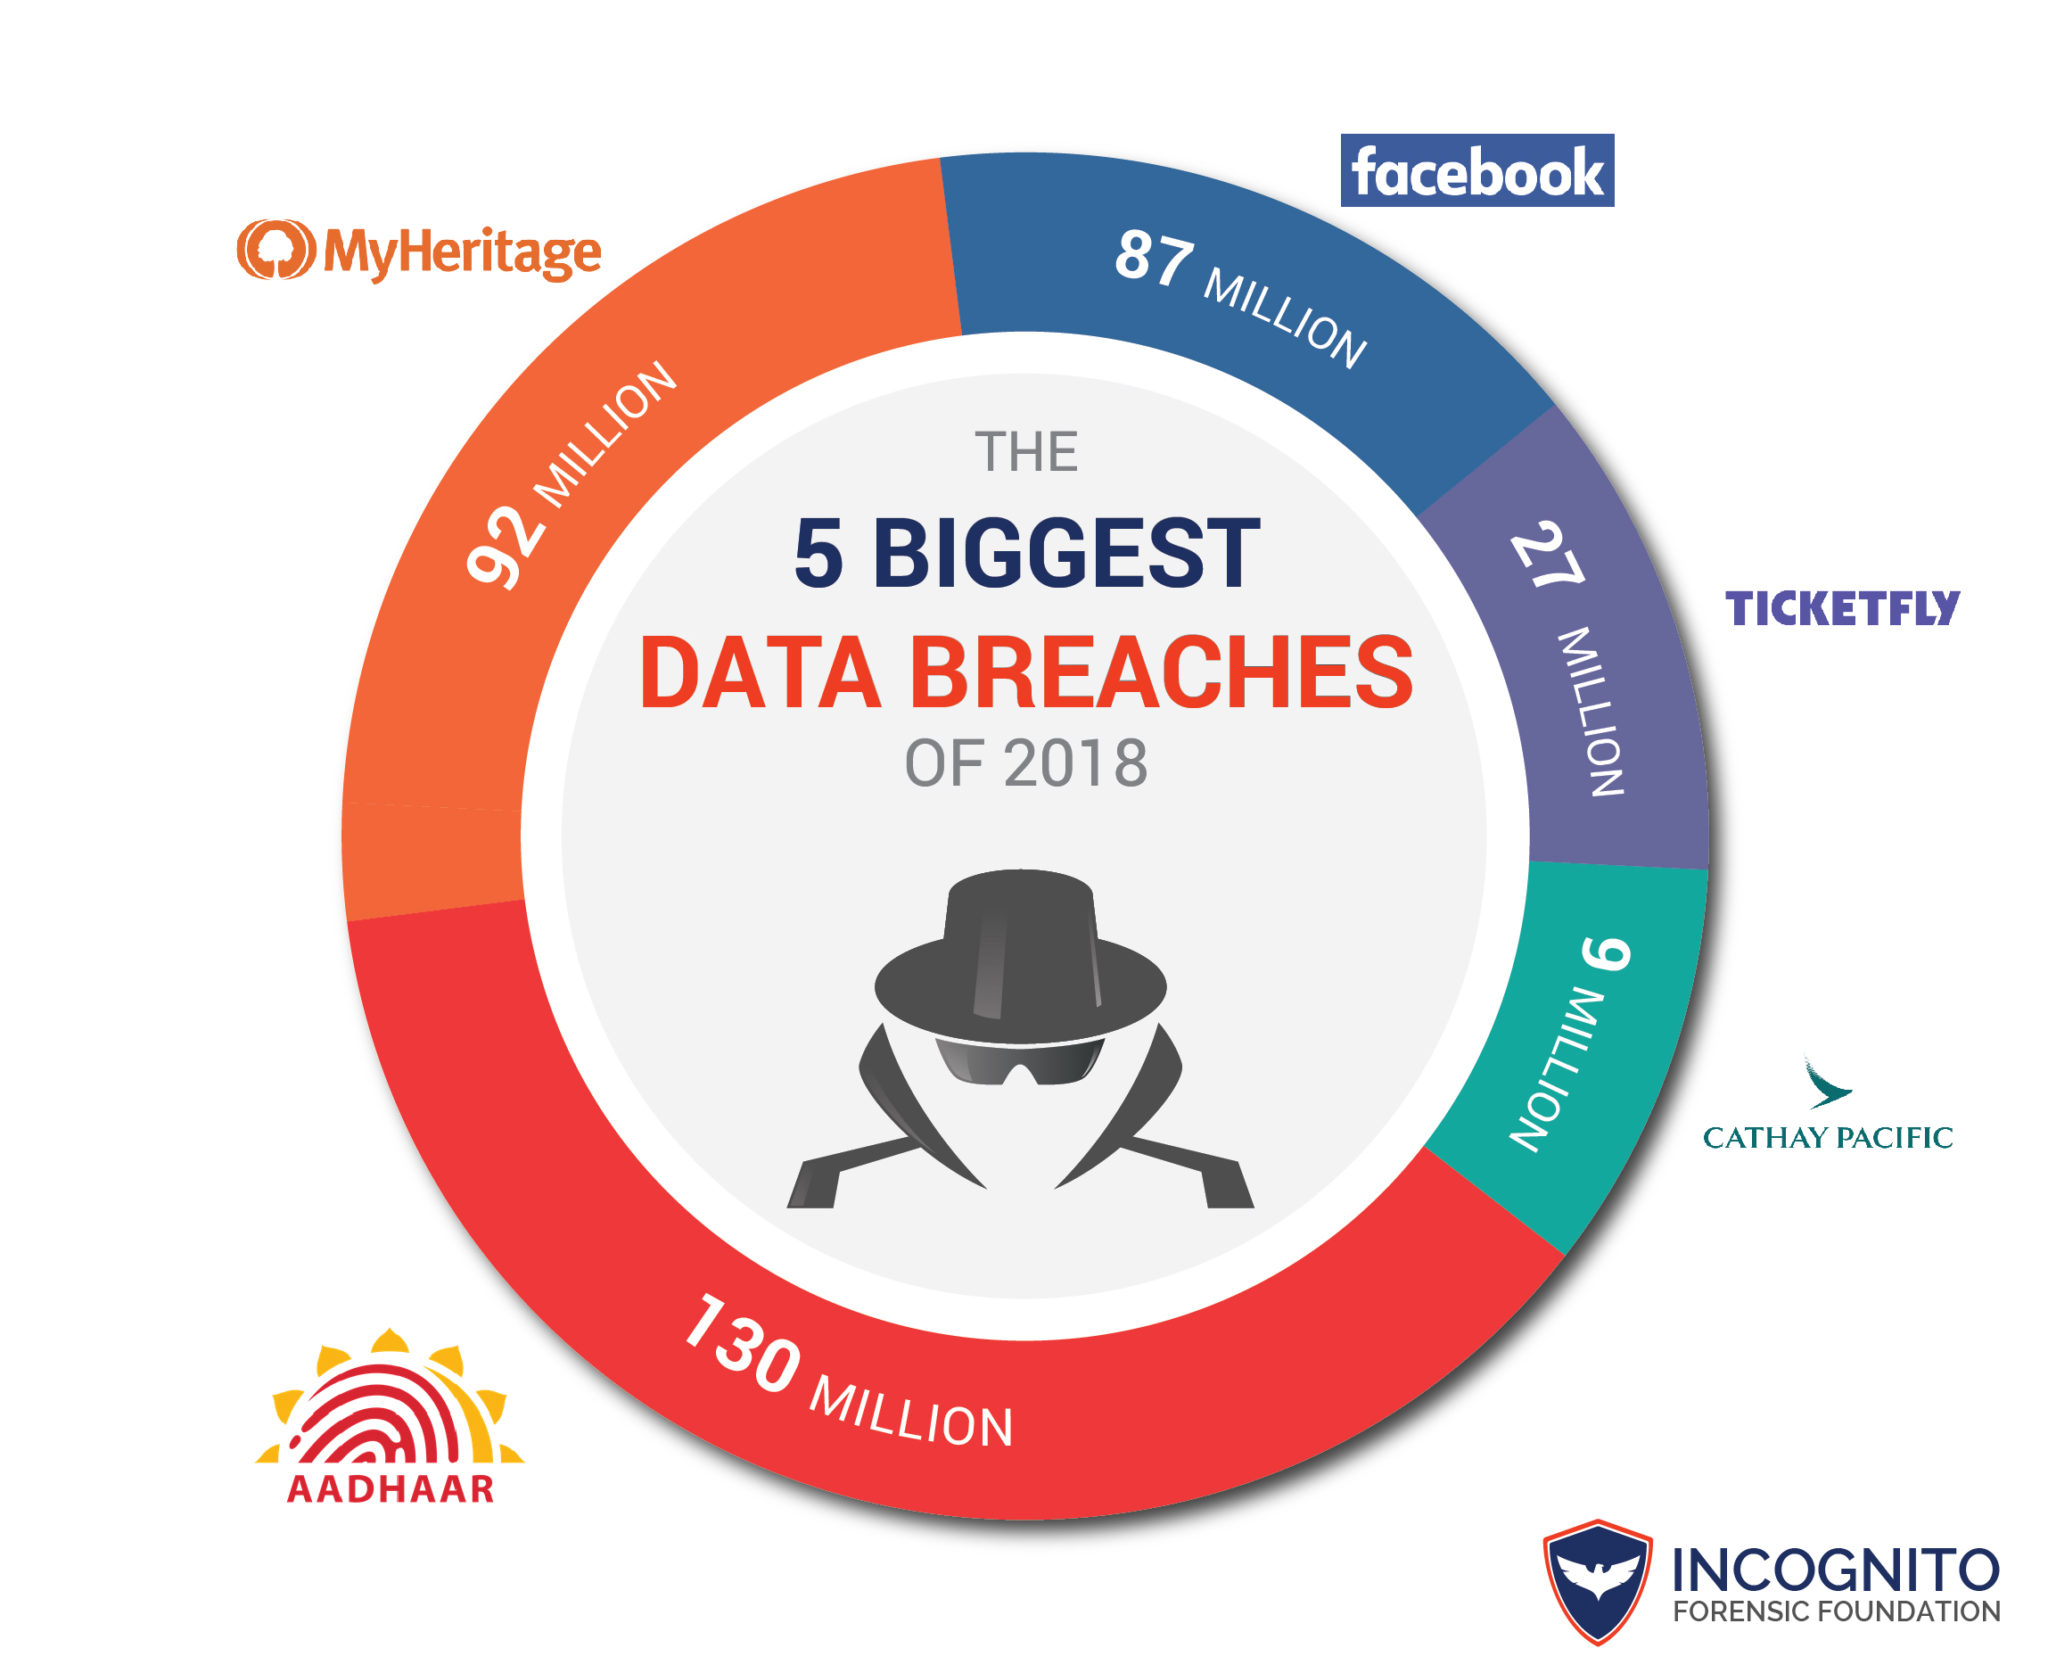 The 5 Biggest Data Breaches of 2018 Know the Recent Data Breaches